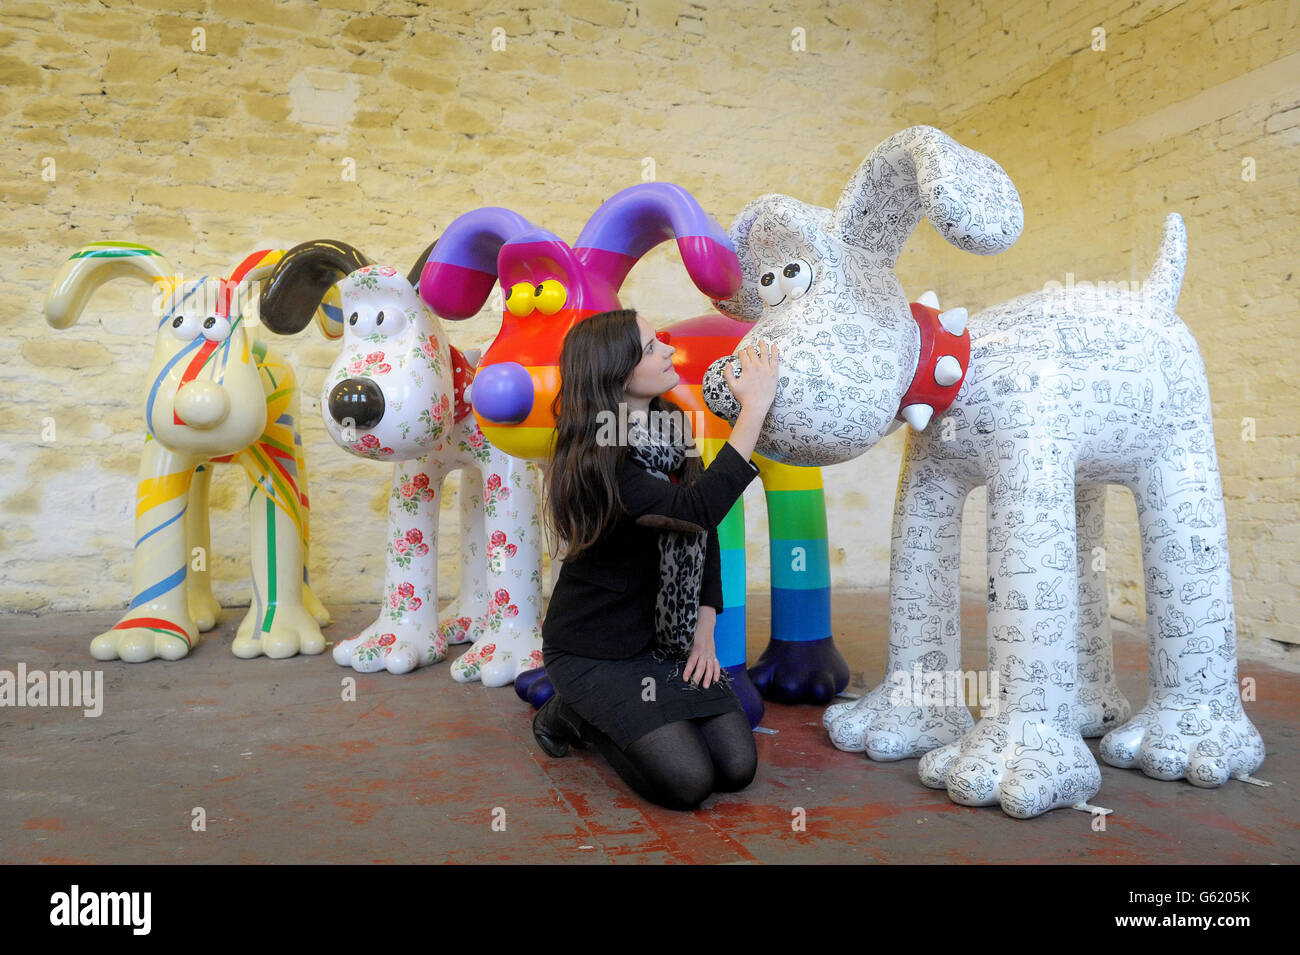 Lauren Vincent, fundraising manager for Gromit Unleashed, poses with four, of around 70, Gromit sculptures painted by (left to right) Sir Paul Smith, Cath Kidston, Richard Williams and Simon Tofield, at a secret location in Bristol before they are placed for public view on an arts trail around the city from July 1st. After the public arts trail the sculptures will be auctioned to raise funds for Wallace and Gromit's Grand Appeal's campaign to raise funds for the expansion of Bristol Children's Hospital. Stock Photo